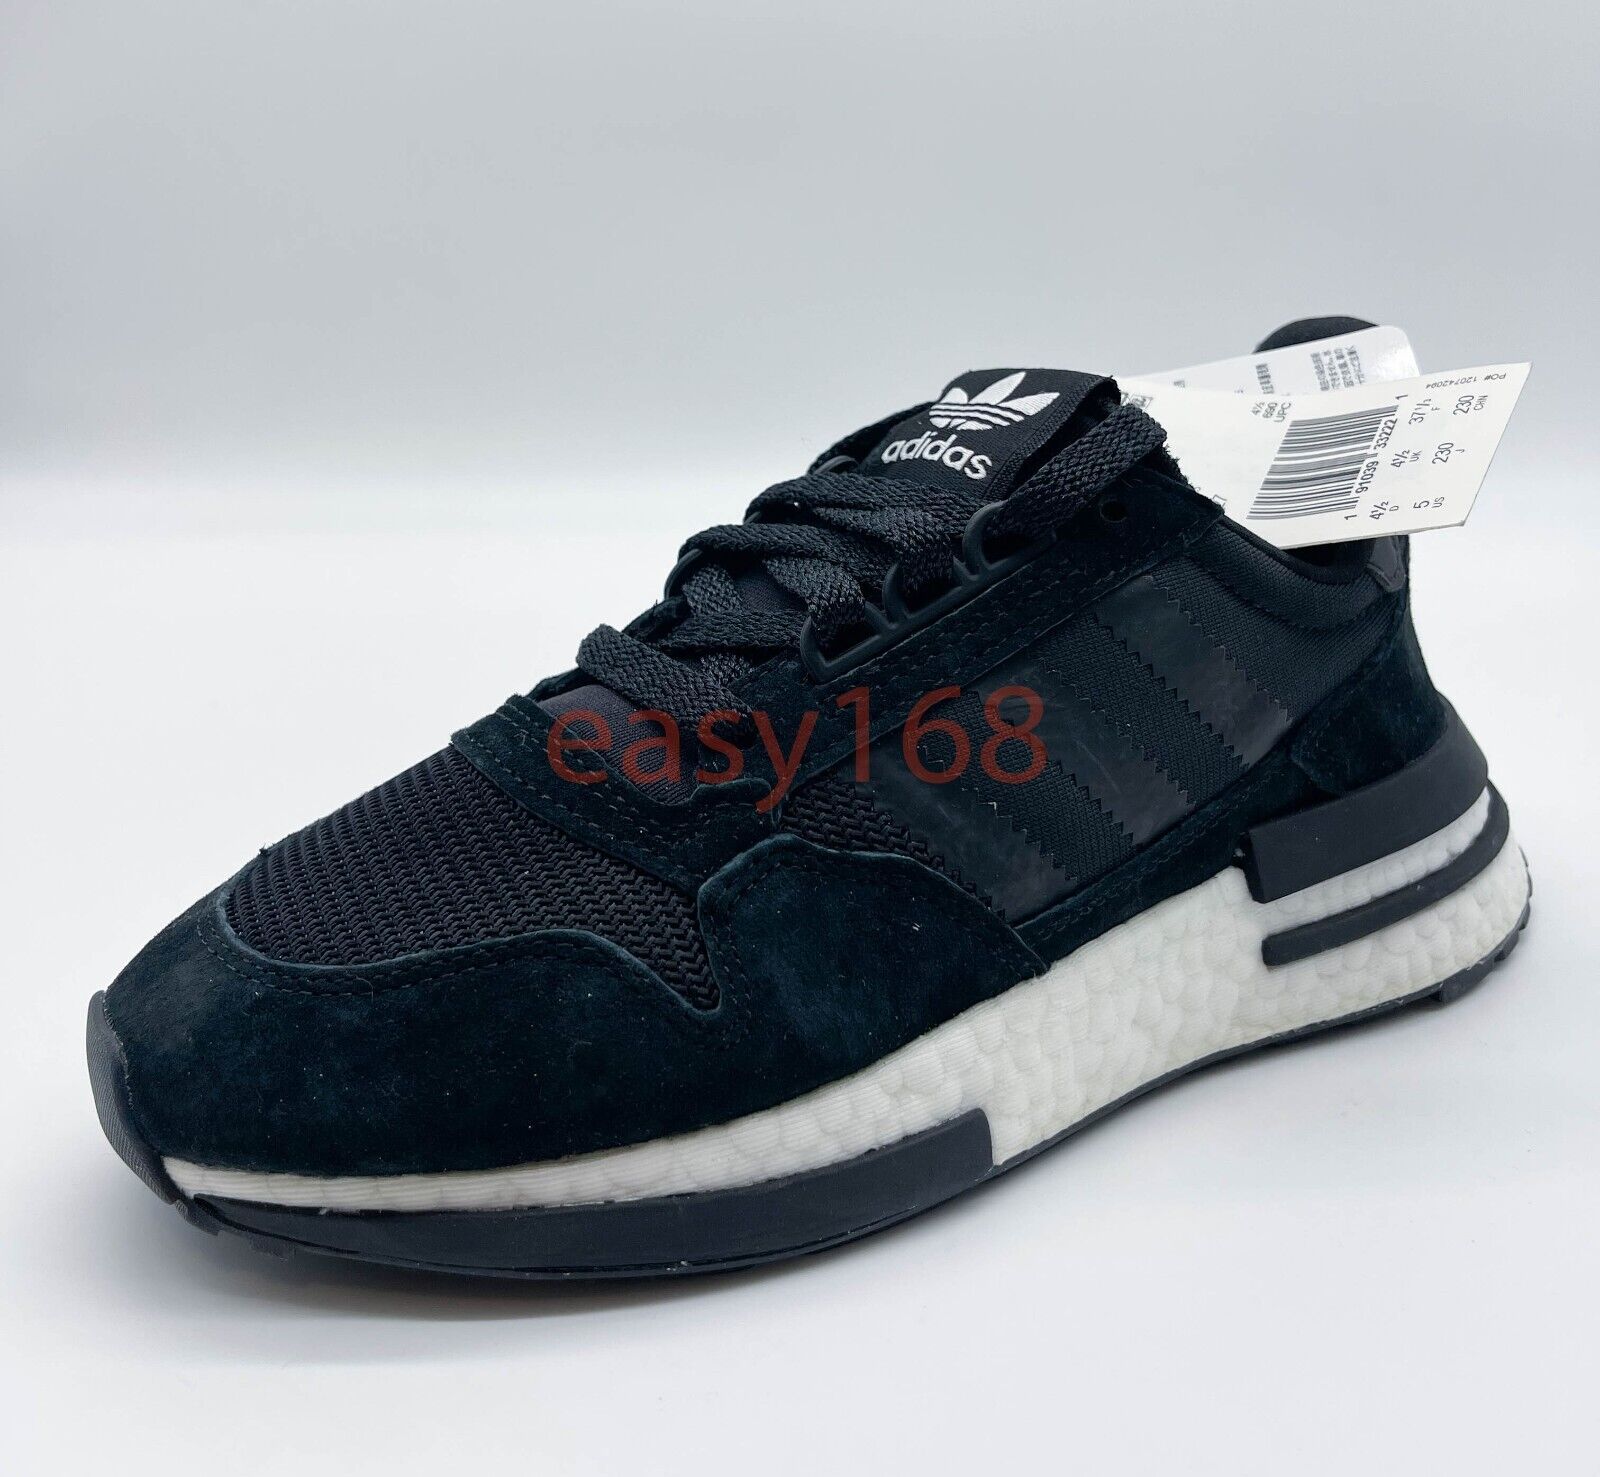 New Adidas Boost ZX 500 RM Shoes black B42227 Men's Size 5 Training Running